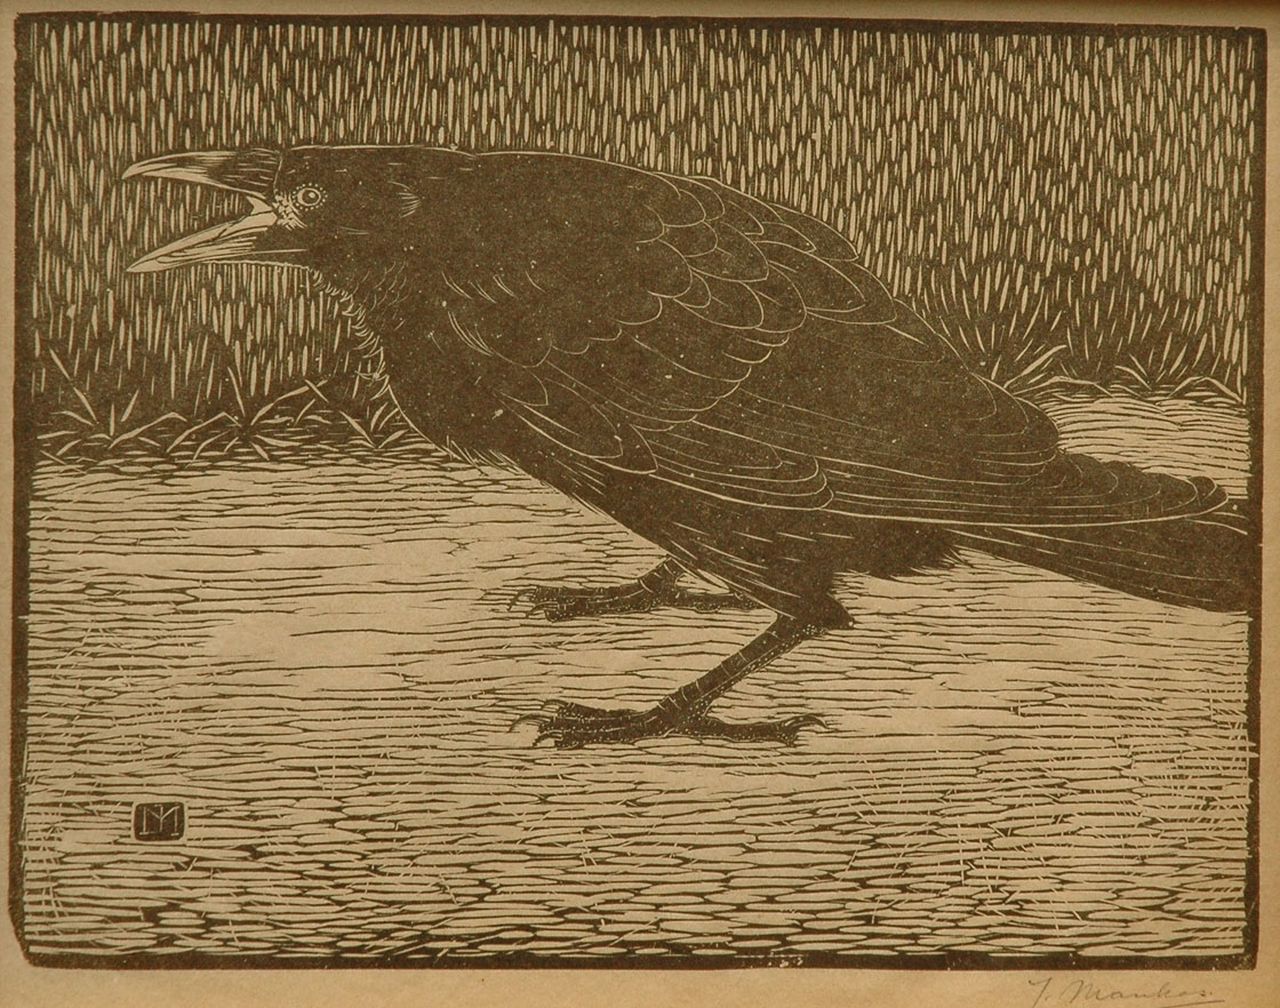 Mankes J.  | Jan Mankes, A screaming crow, Holzstich auf japanischem Papier 18,3 x 23,8 cm, signed with mon. in the block and l.r. in full (in pencil und executed 1918